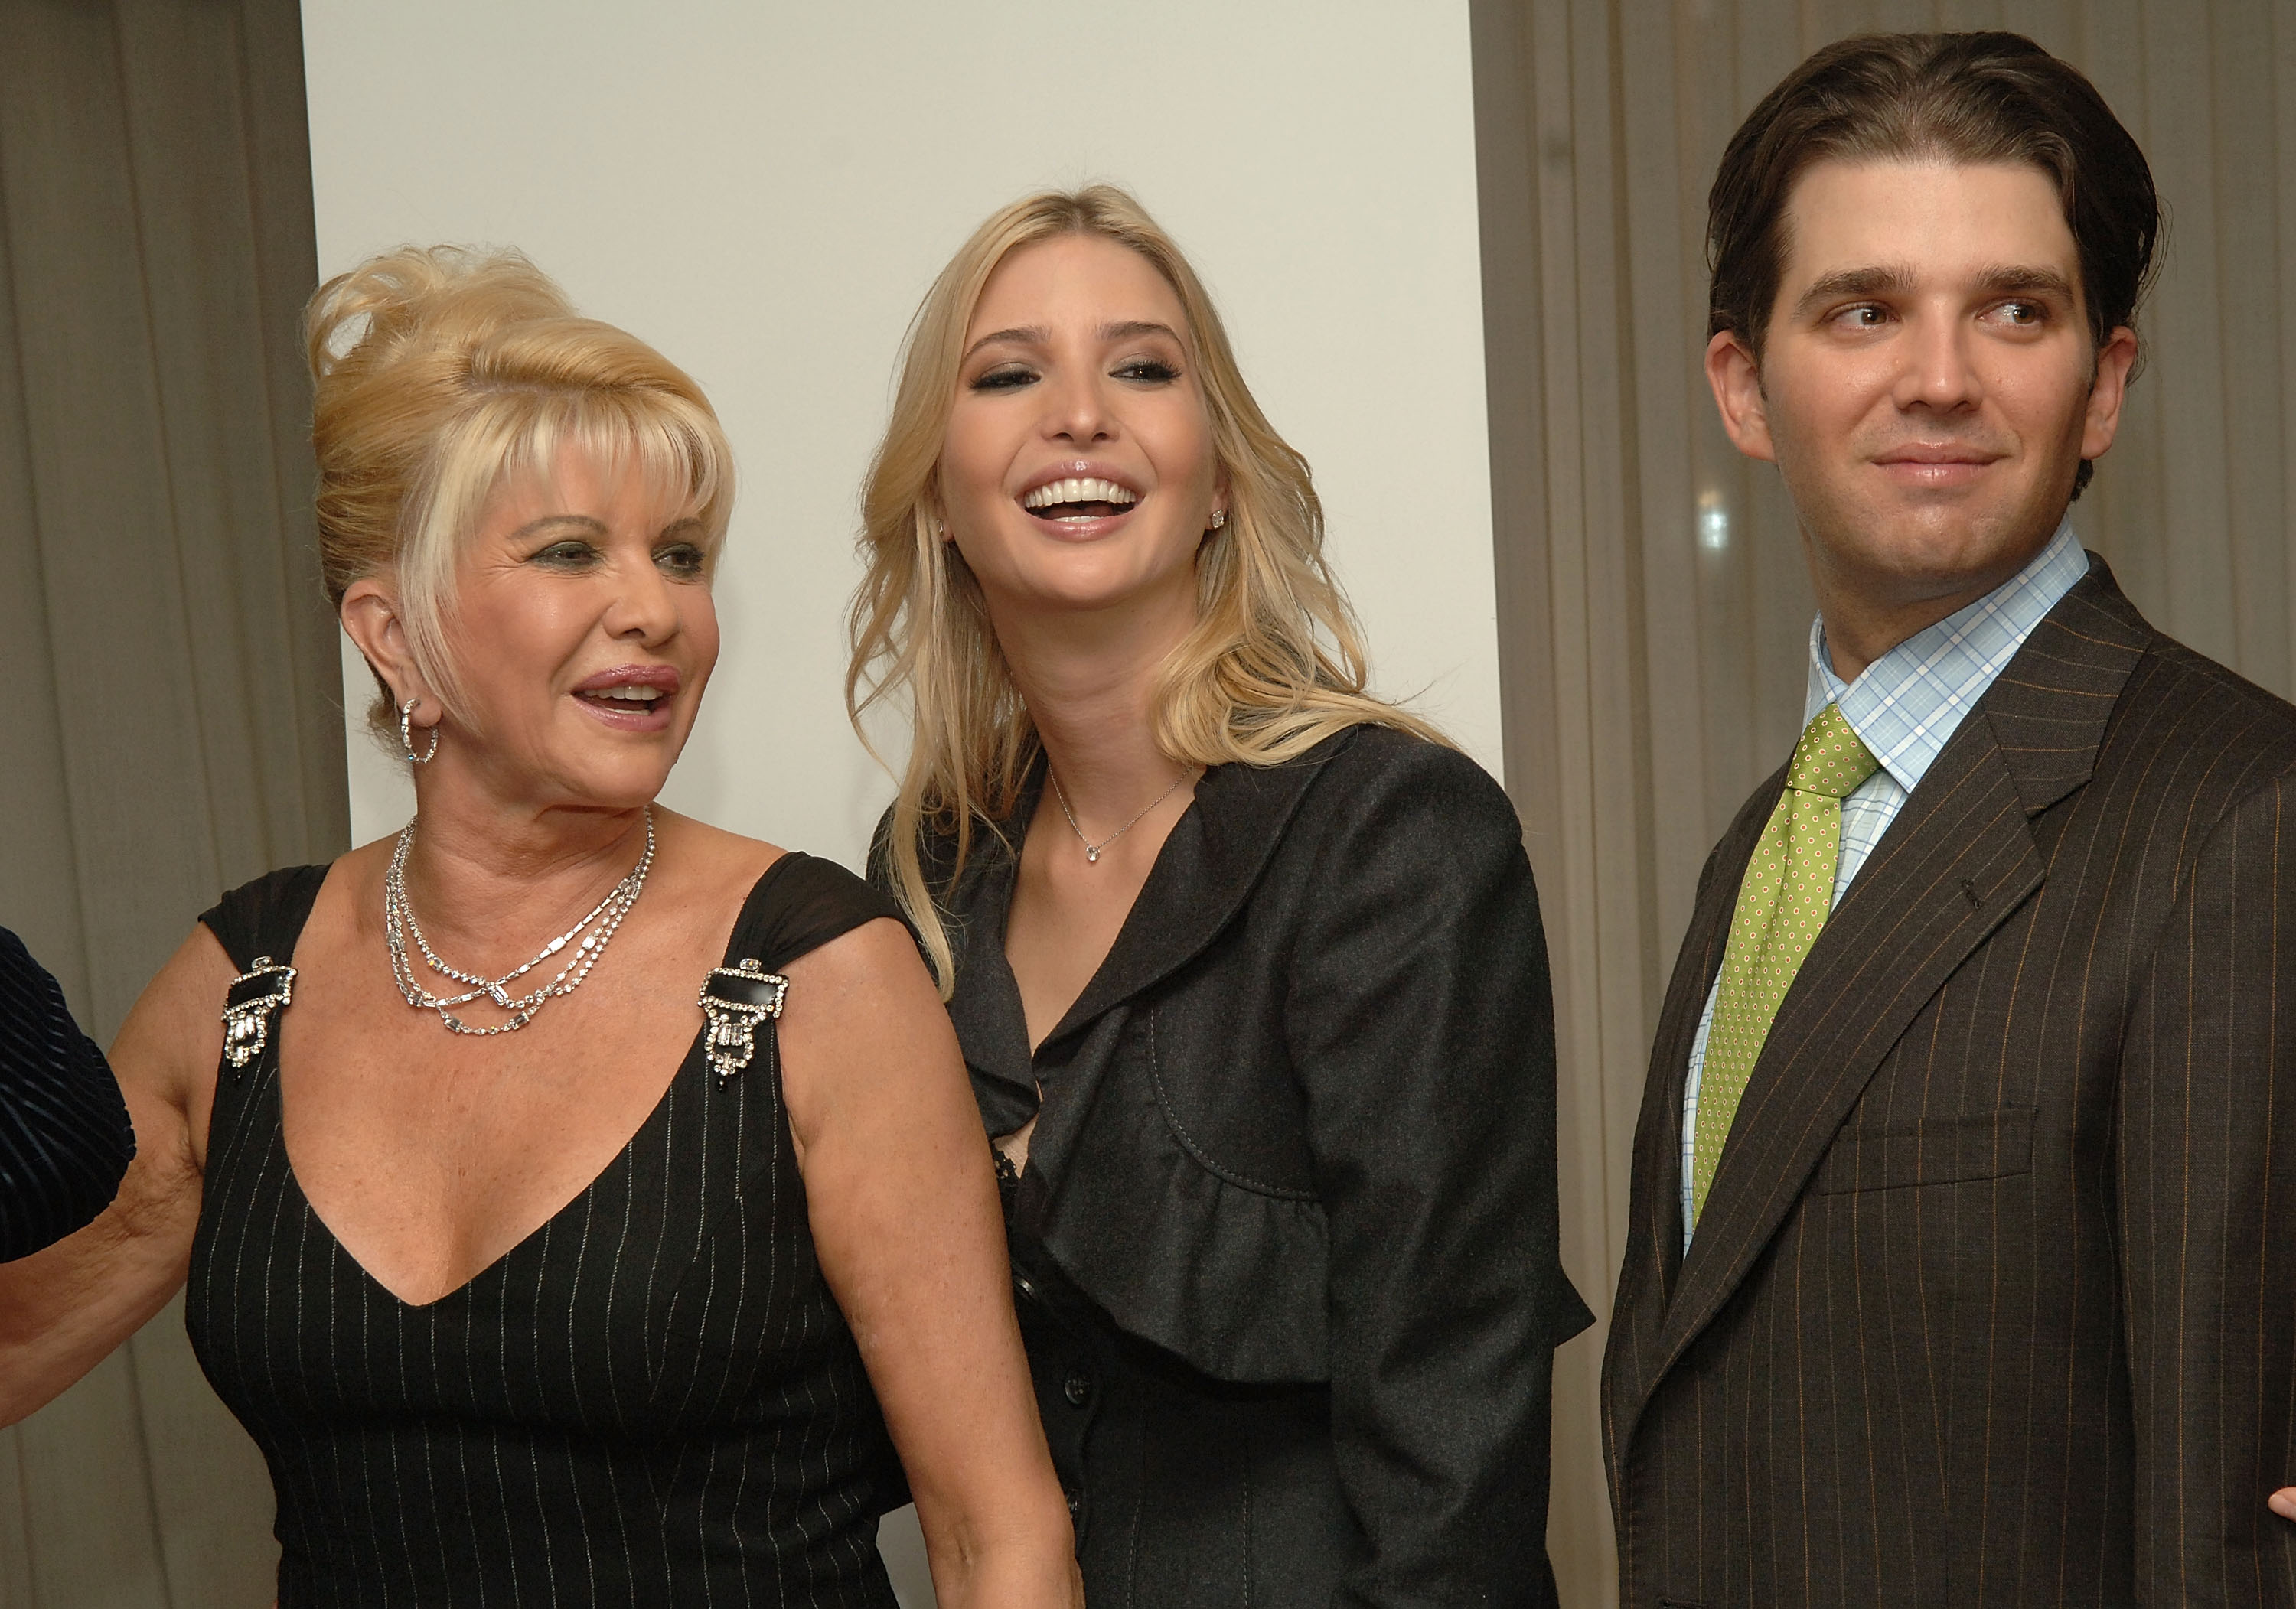 Ivana Trump, Ivanka Trump and Donald Trump Jr. attend Italian singer Nicola Congiu's private performance on October 15, 2007 in New York City. | Source: Getty Images